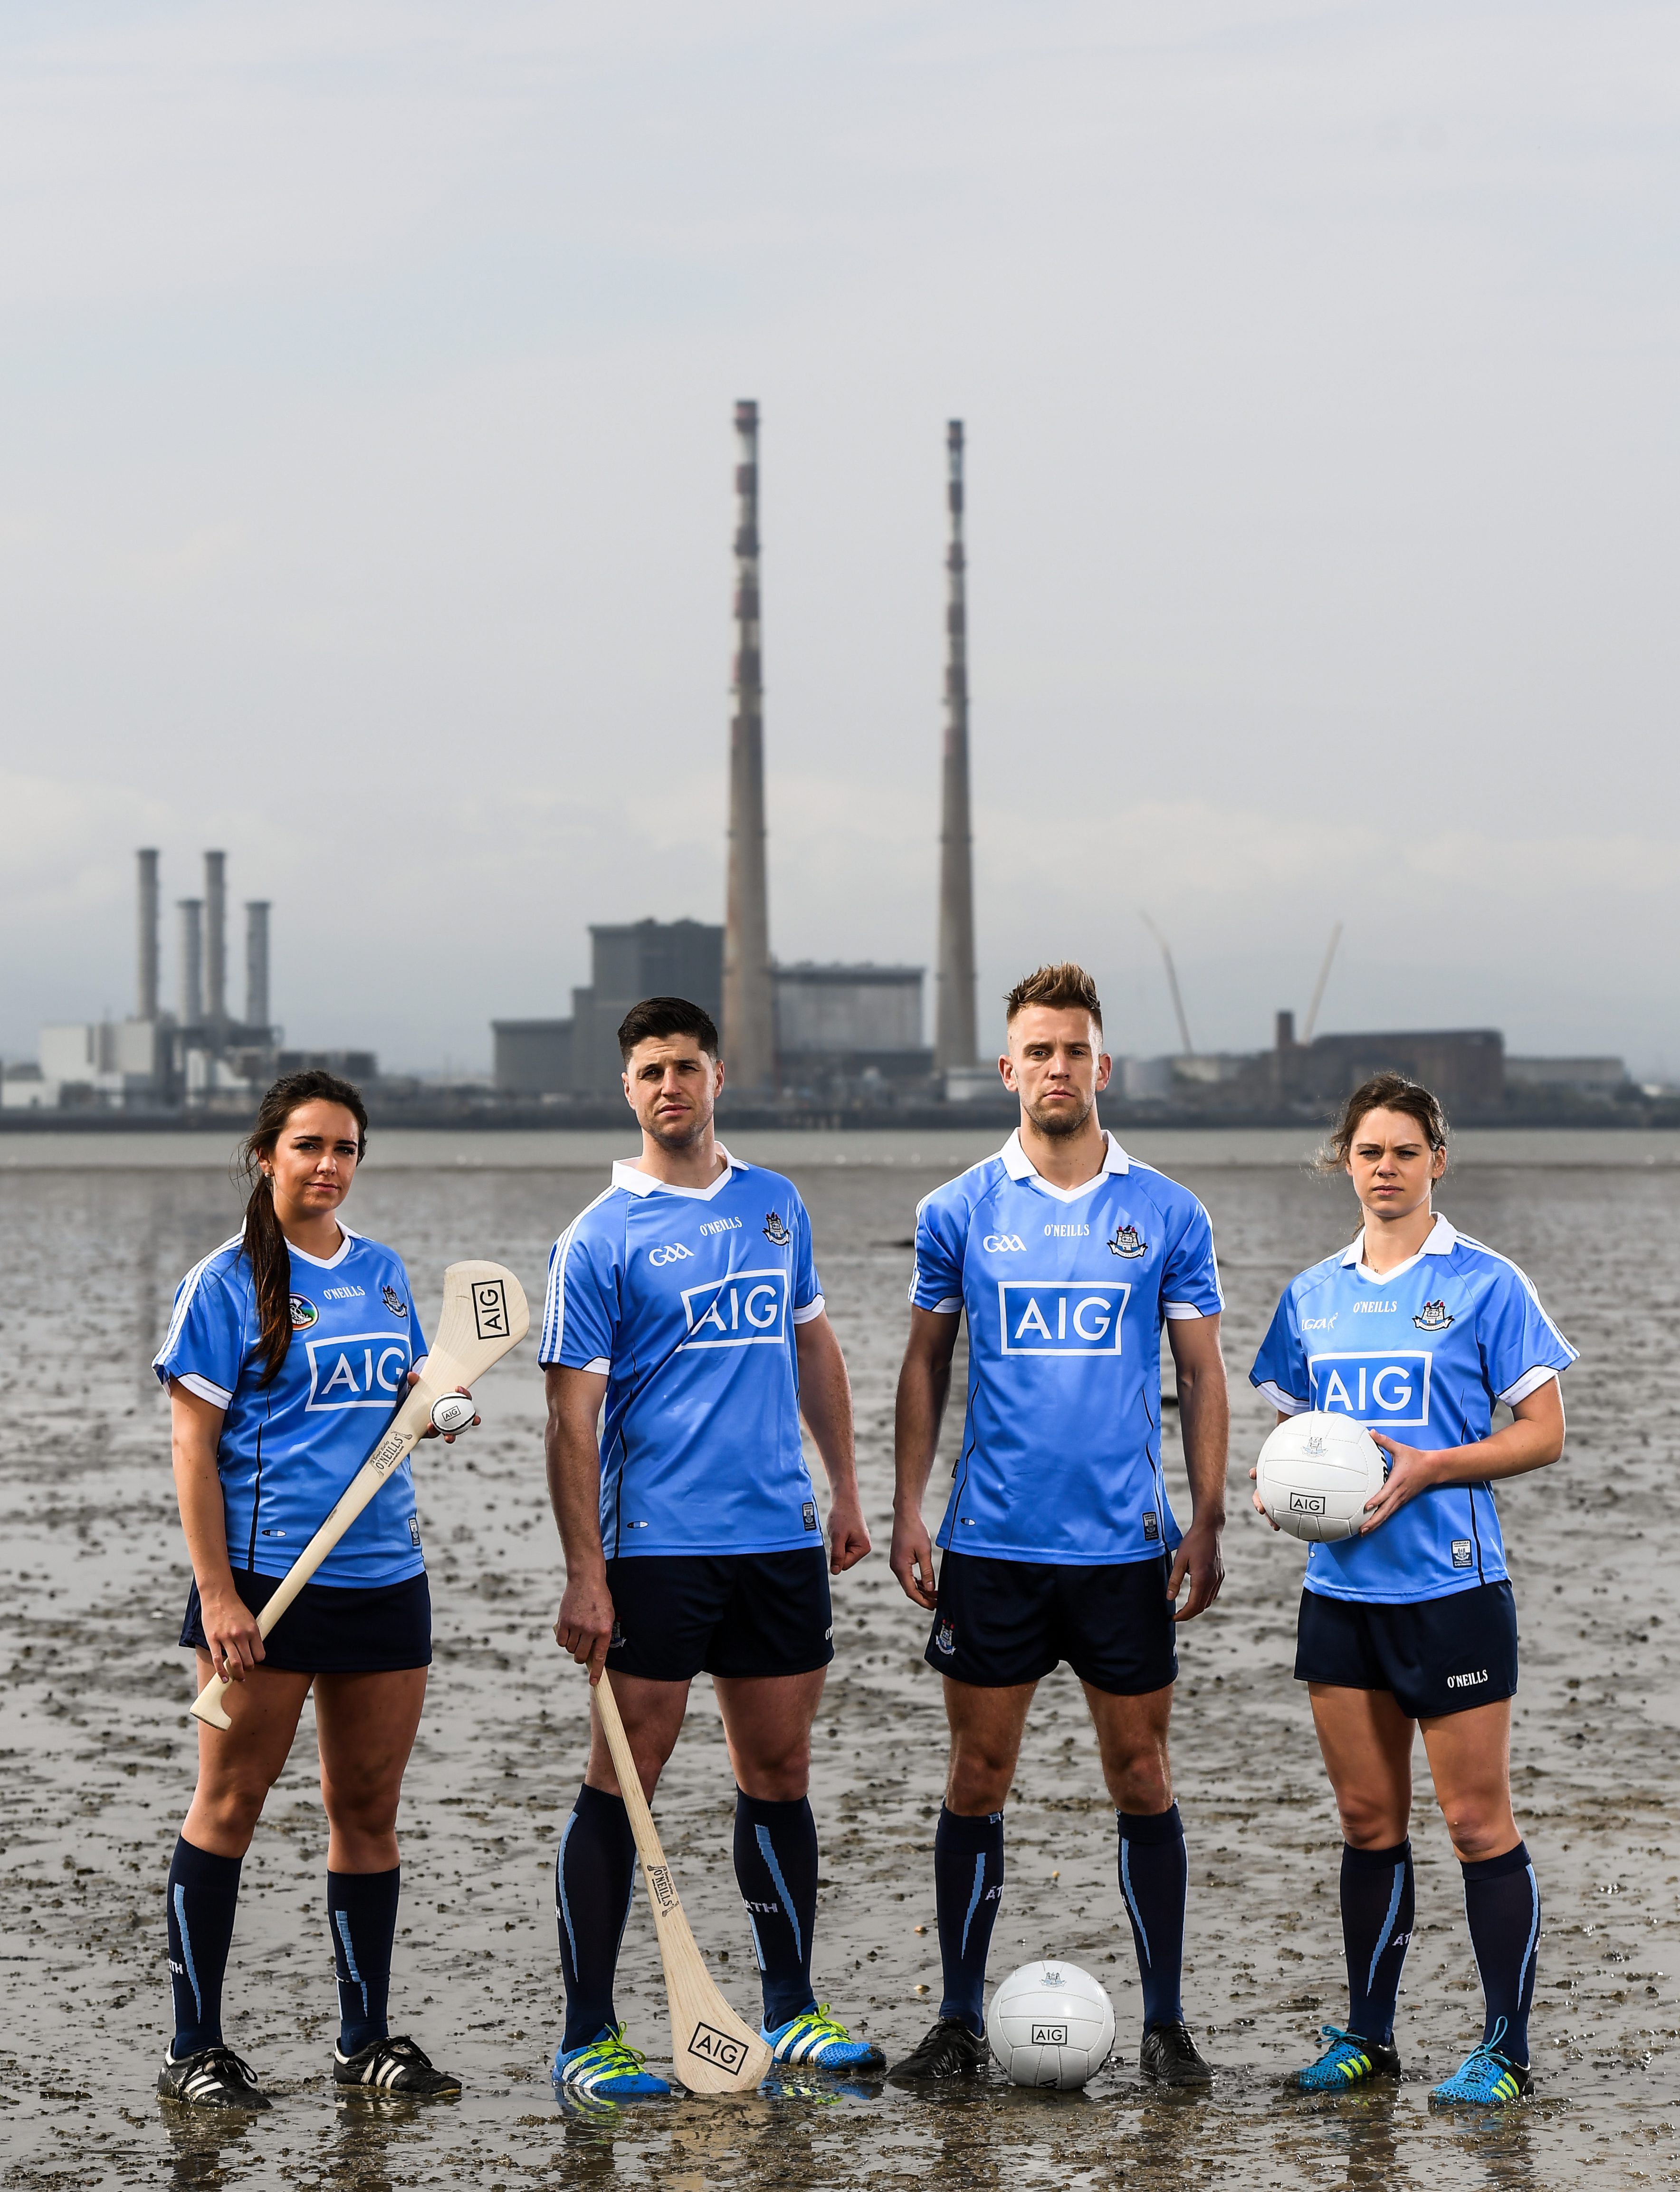 12 May 2016; Dublin stars Ali Twomey, Noelle Healy, David Treacy and Jonny Cooper helped Dublin GAA and sponsors AIG Insurance officially launch the new Dublin jersey today. Available at oneills.com and at sports outlets nationwide for 65, the jersey will be worn for the first time in a game by the Dublin minor hurlers on Saturday against Kilkenny. Pictured from left are Dublin Camogie star Ali Twomey, Dublin hurler David Treacy, Dublin footballer Jonny Cooper and Dublin Ladies Footballer Noelle Healy. Photo by Stephen McCarthy/Sportsfile